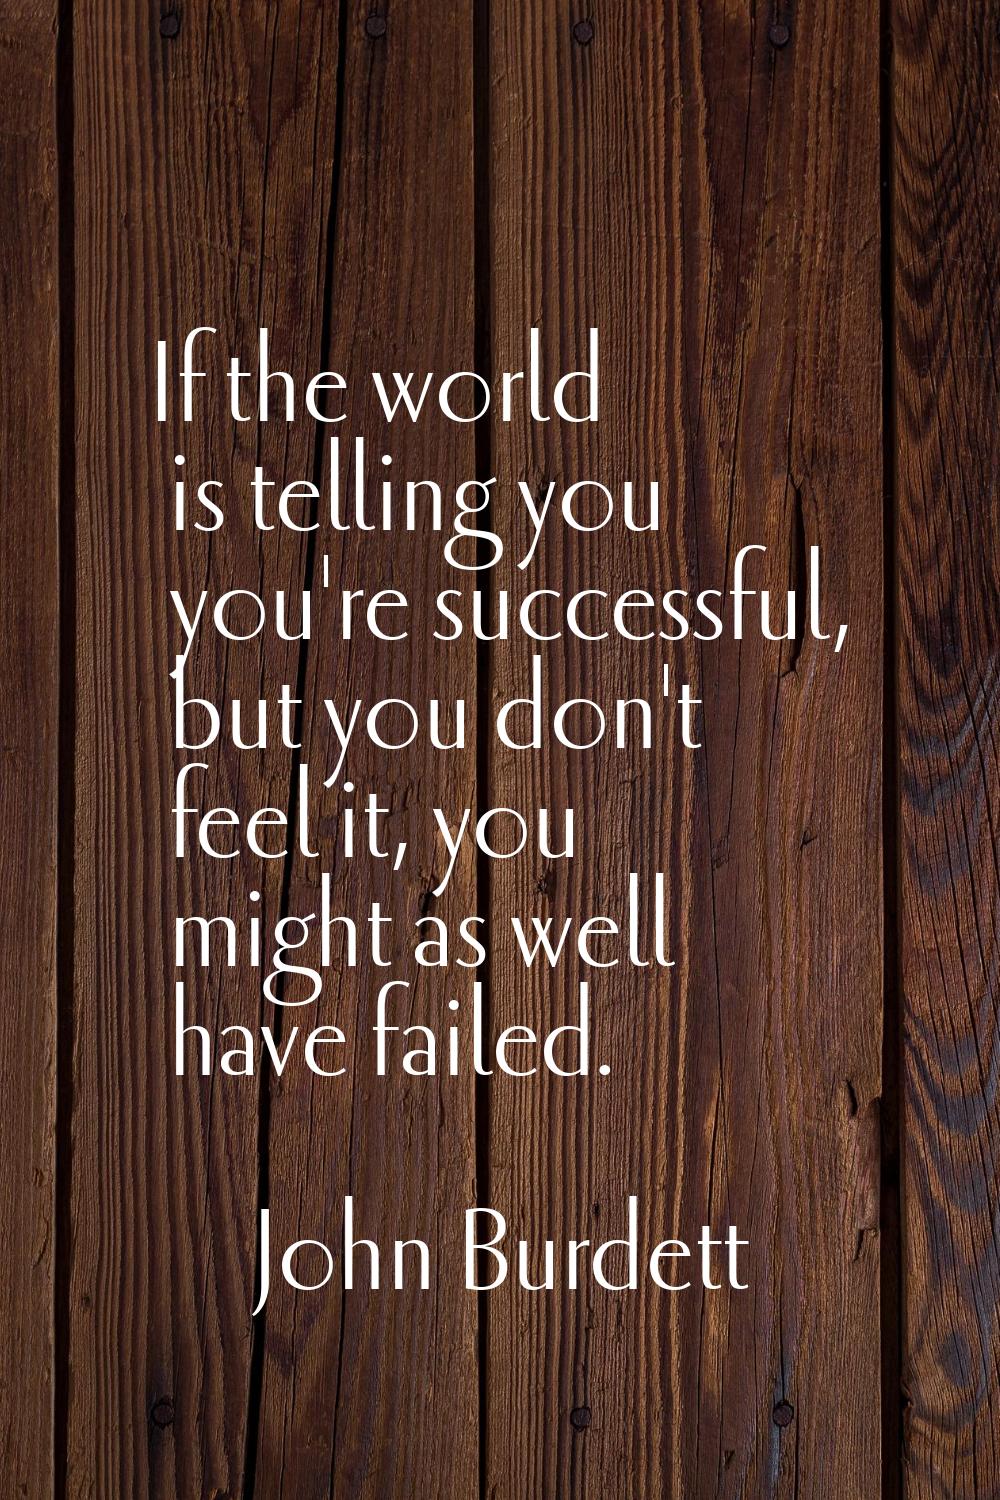 If the world is telling you you're successful, but you don't feel it, you might as well have failed